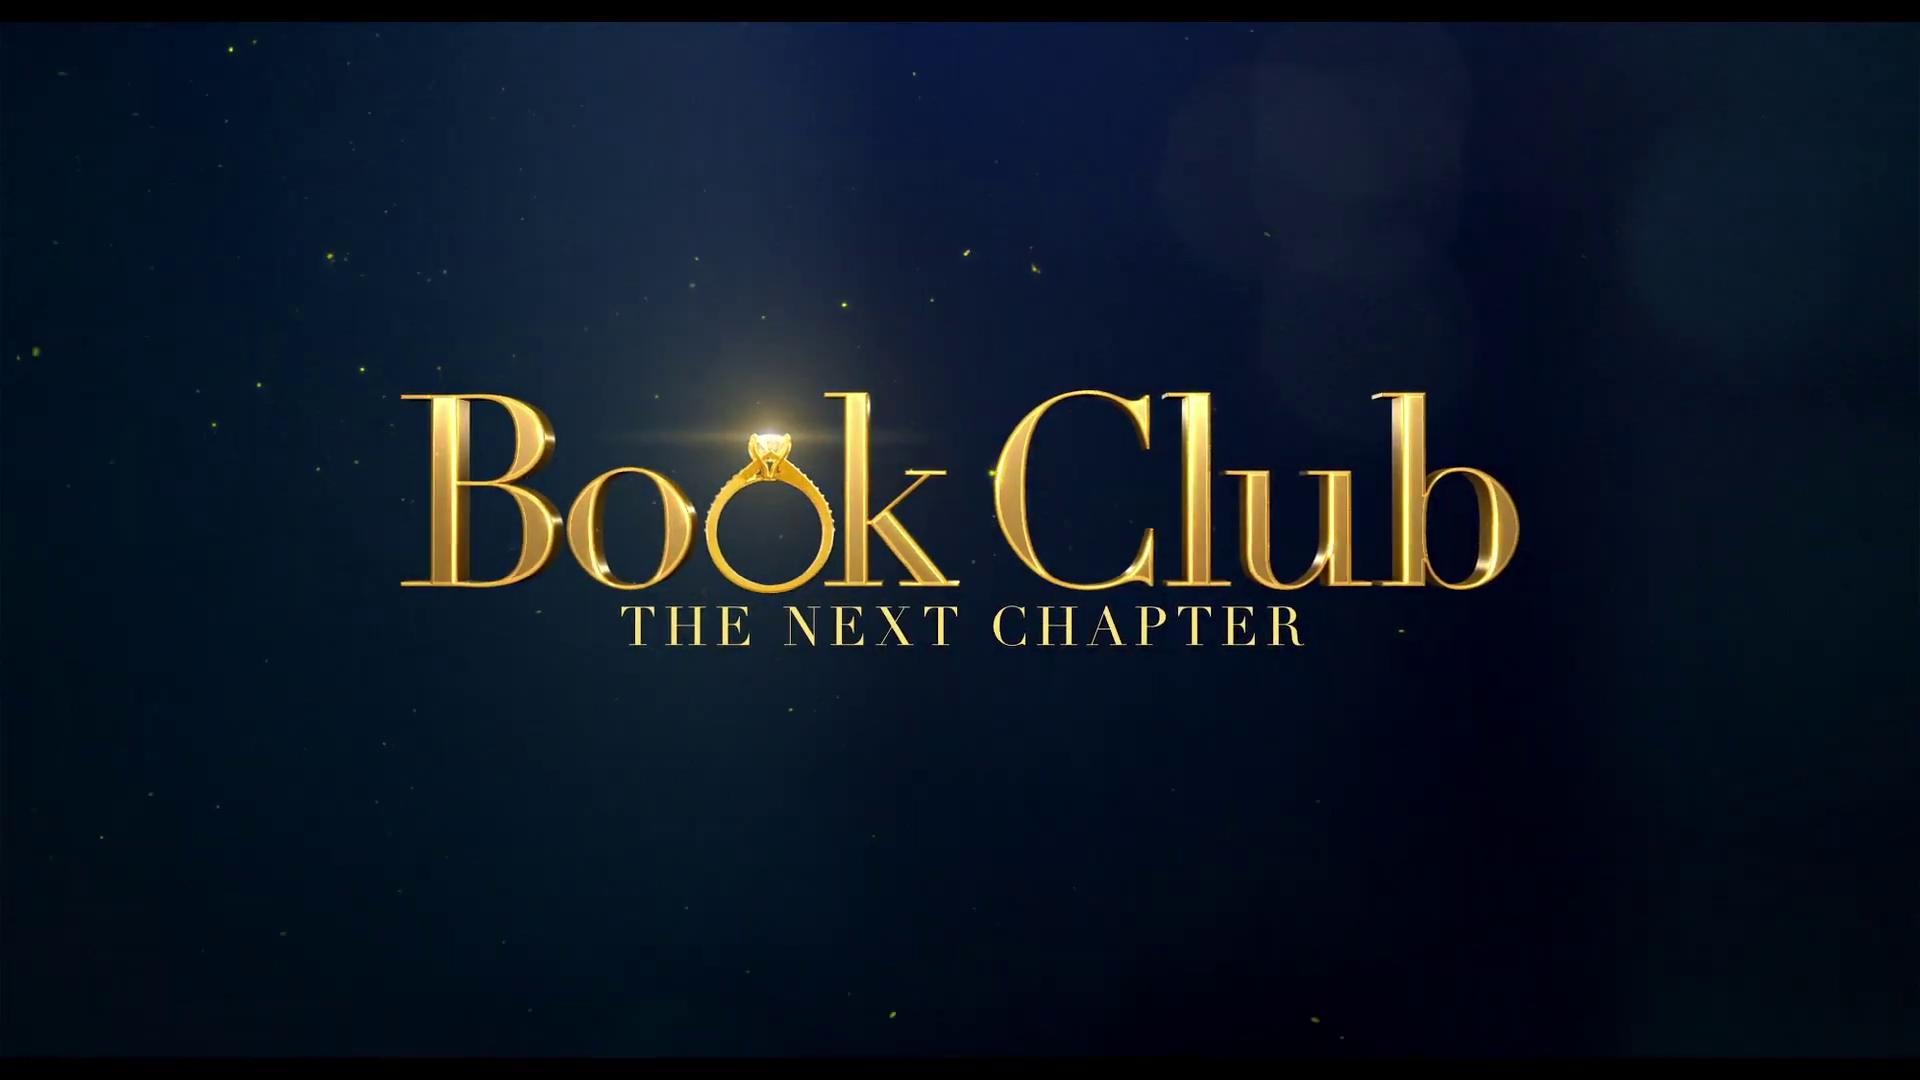 Book Club 2: The Next Chapter